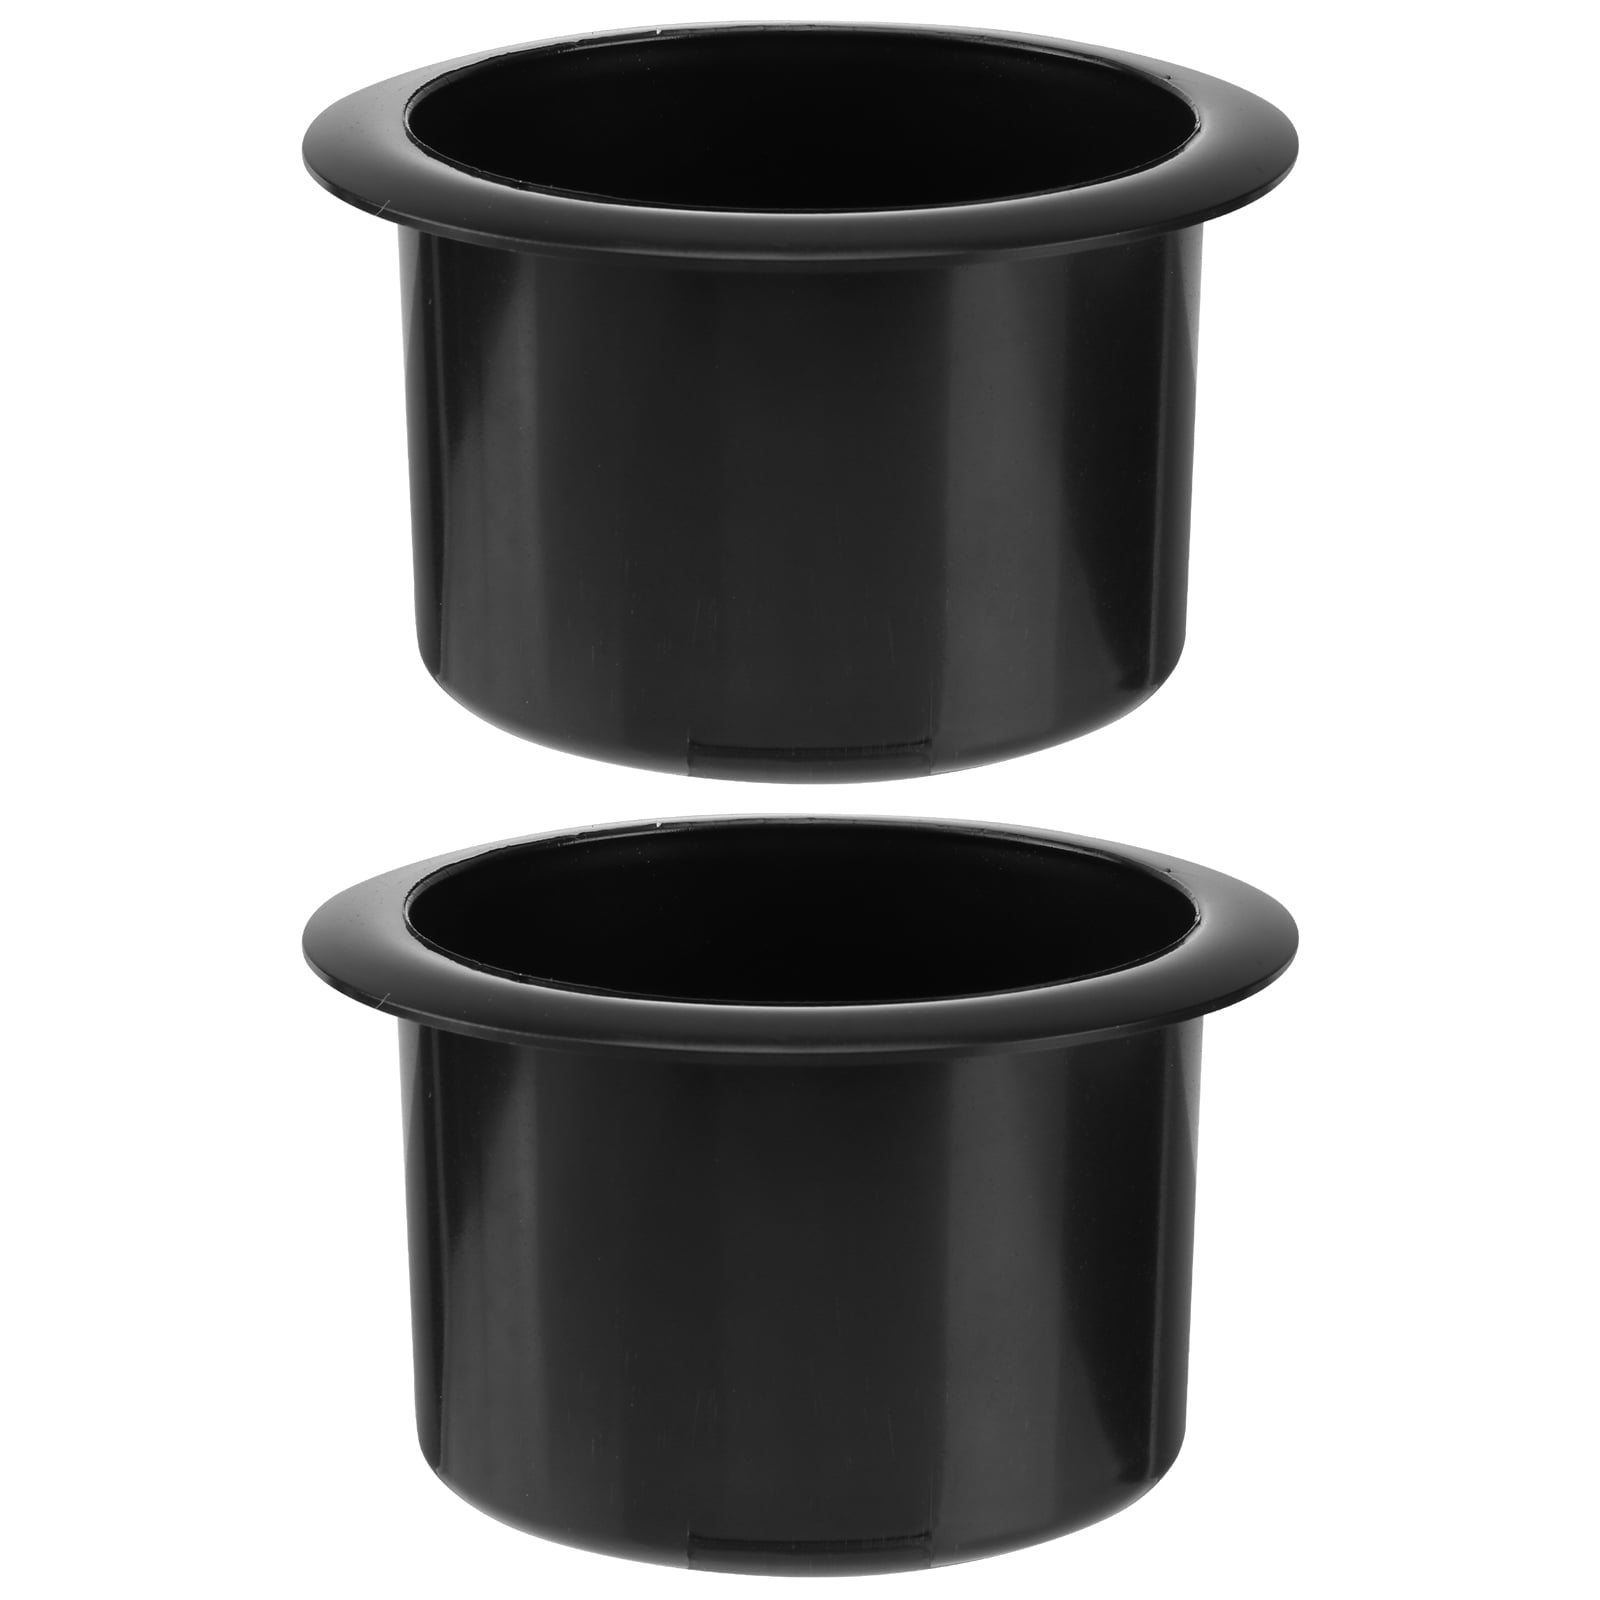 Black Plastic Cup Holder Insert For Sofa Boat RV Couch Recliner Poker Table 85mm 